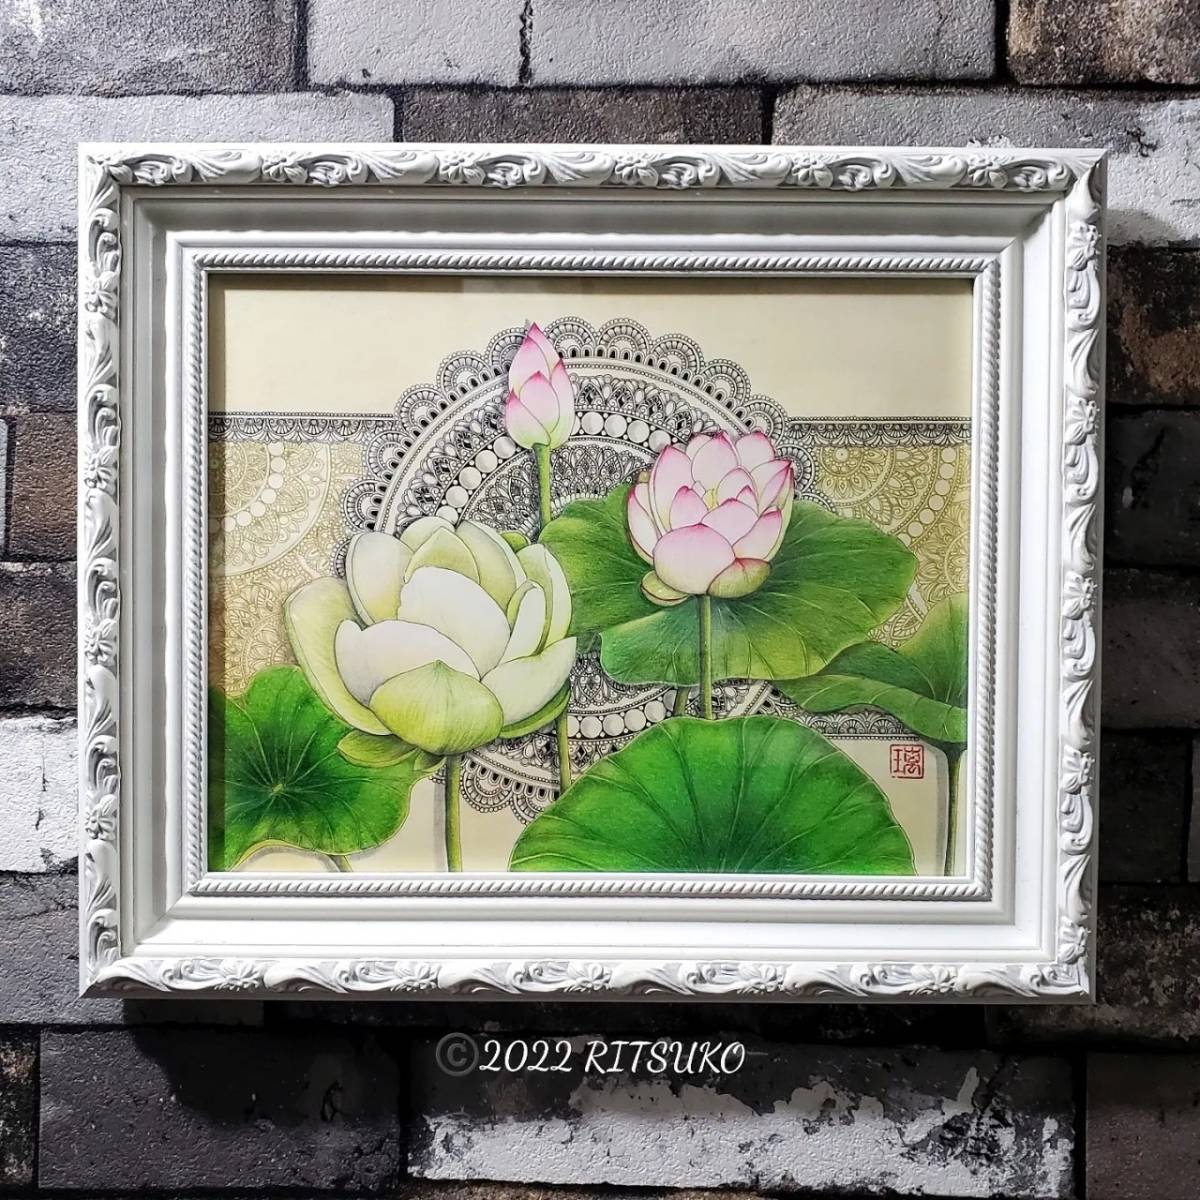 Original painting, one of a kind, hand-painted lotus, framed, lotus painting, ballpoint pen drawing, Japanese artist, colored pencil drawing, 30.5 x 26 cm, painting, picture, framed, art, interior, gift, Artwork, Painting, others